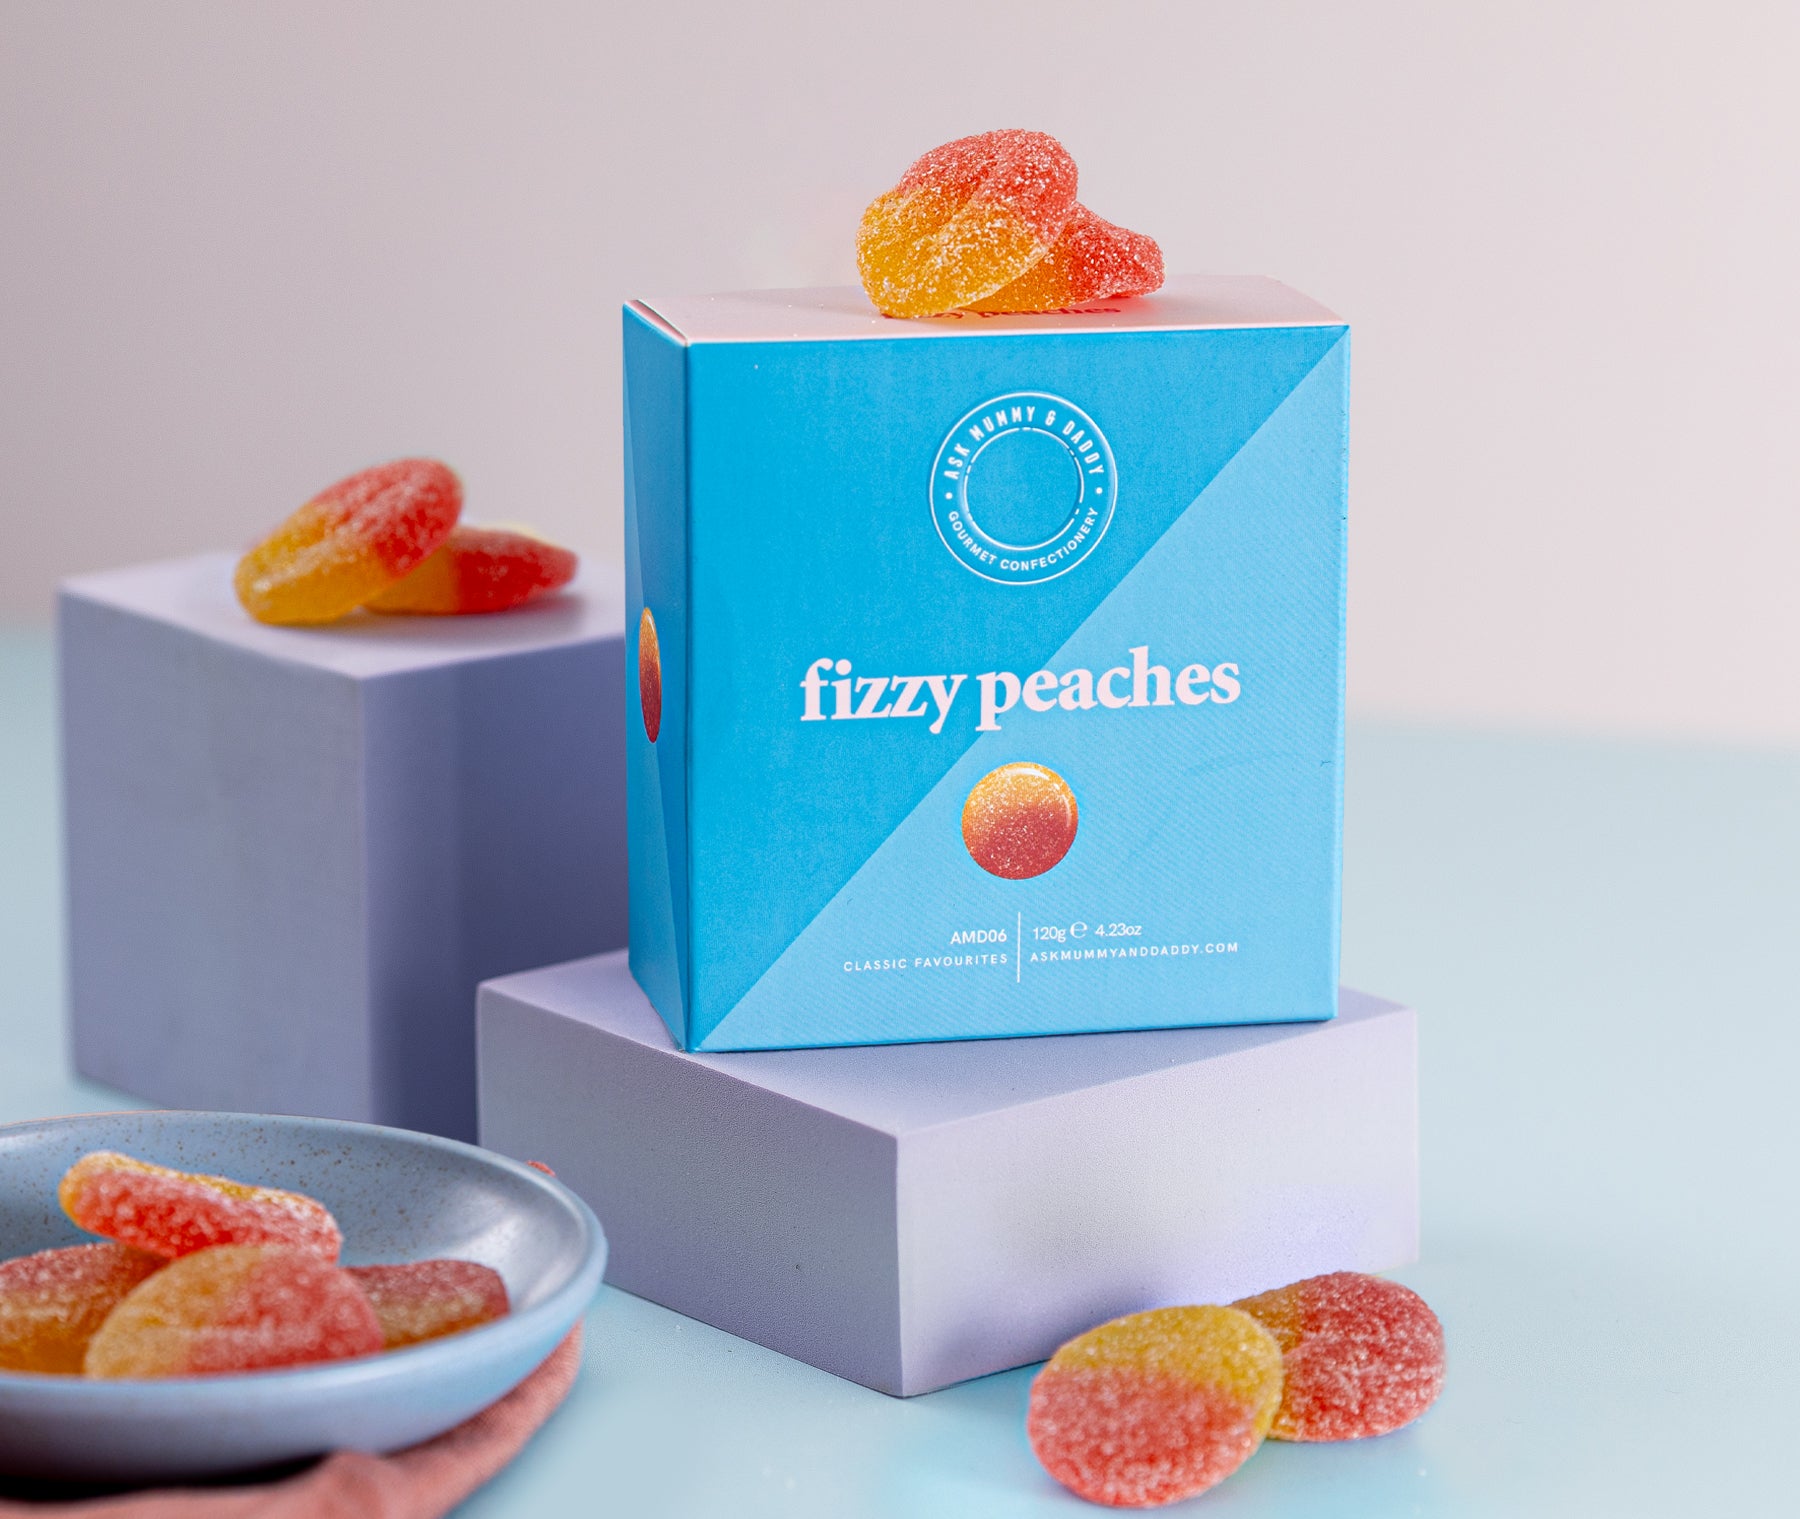 Prodct information banner - Fizzy Peaches Gift Box